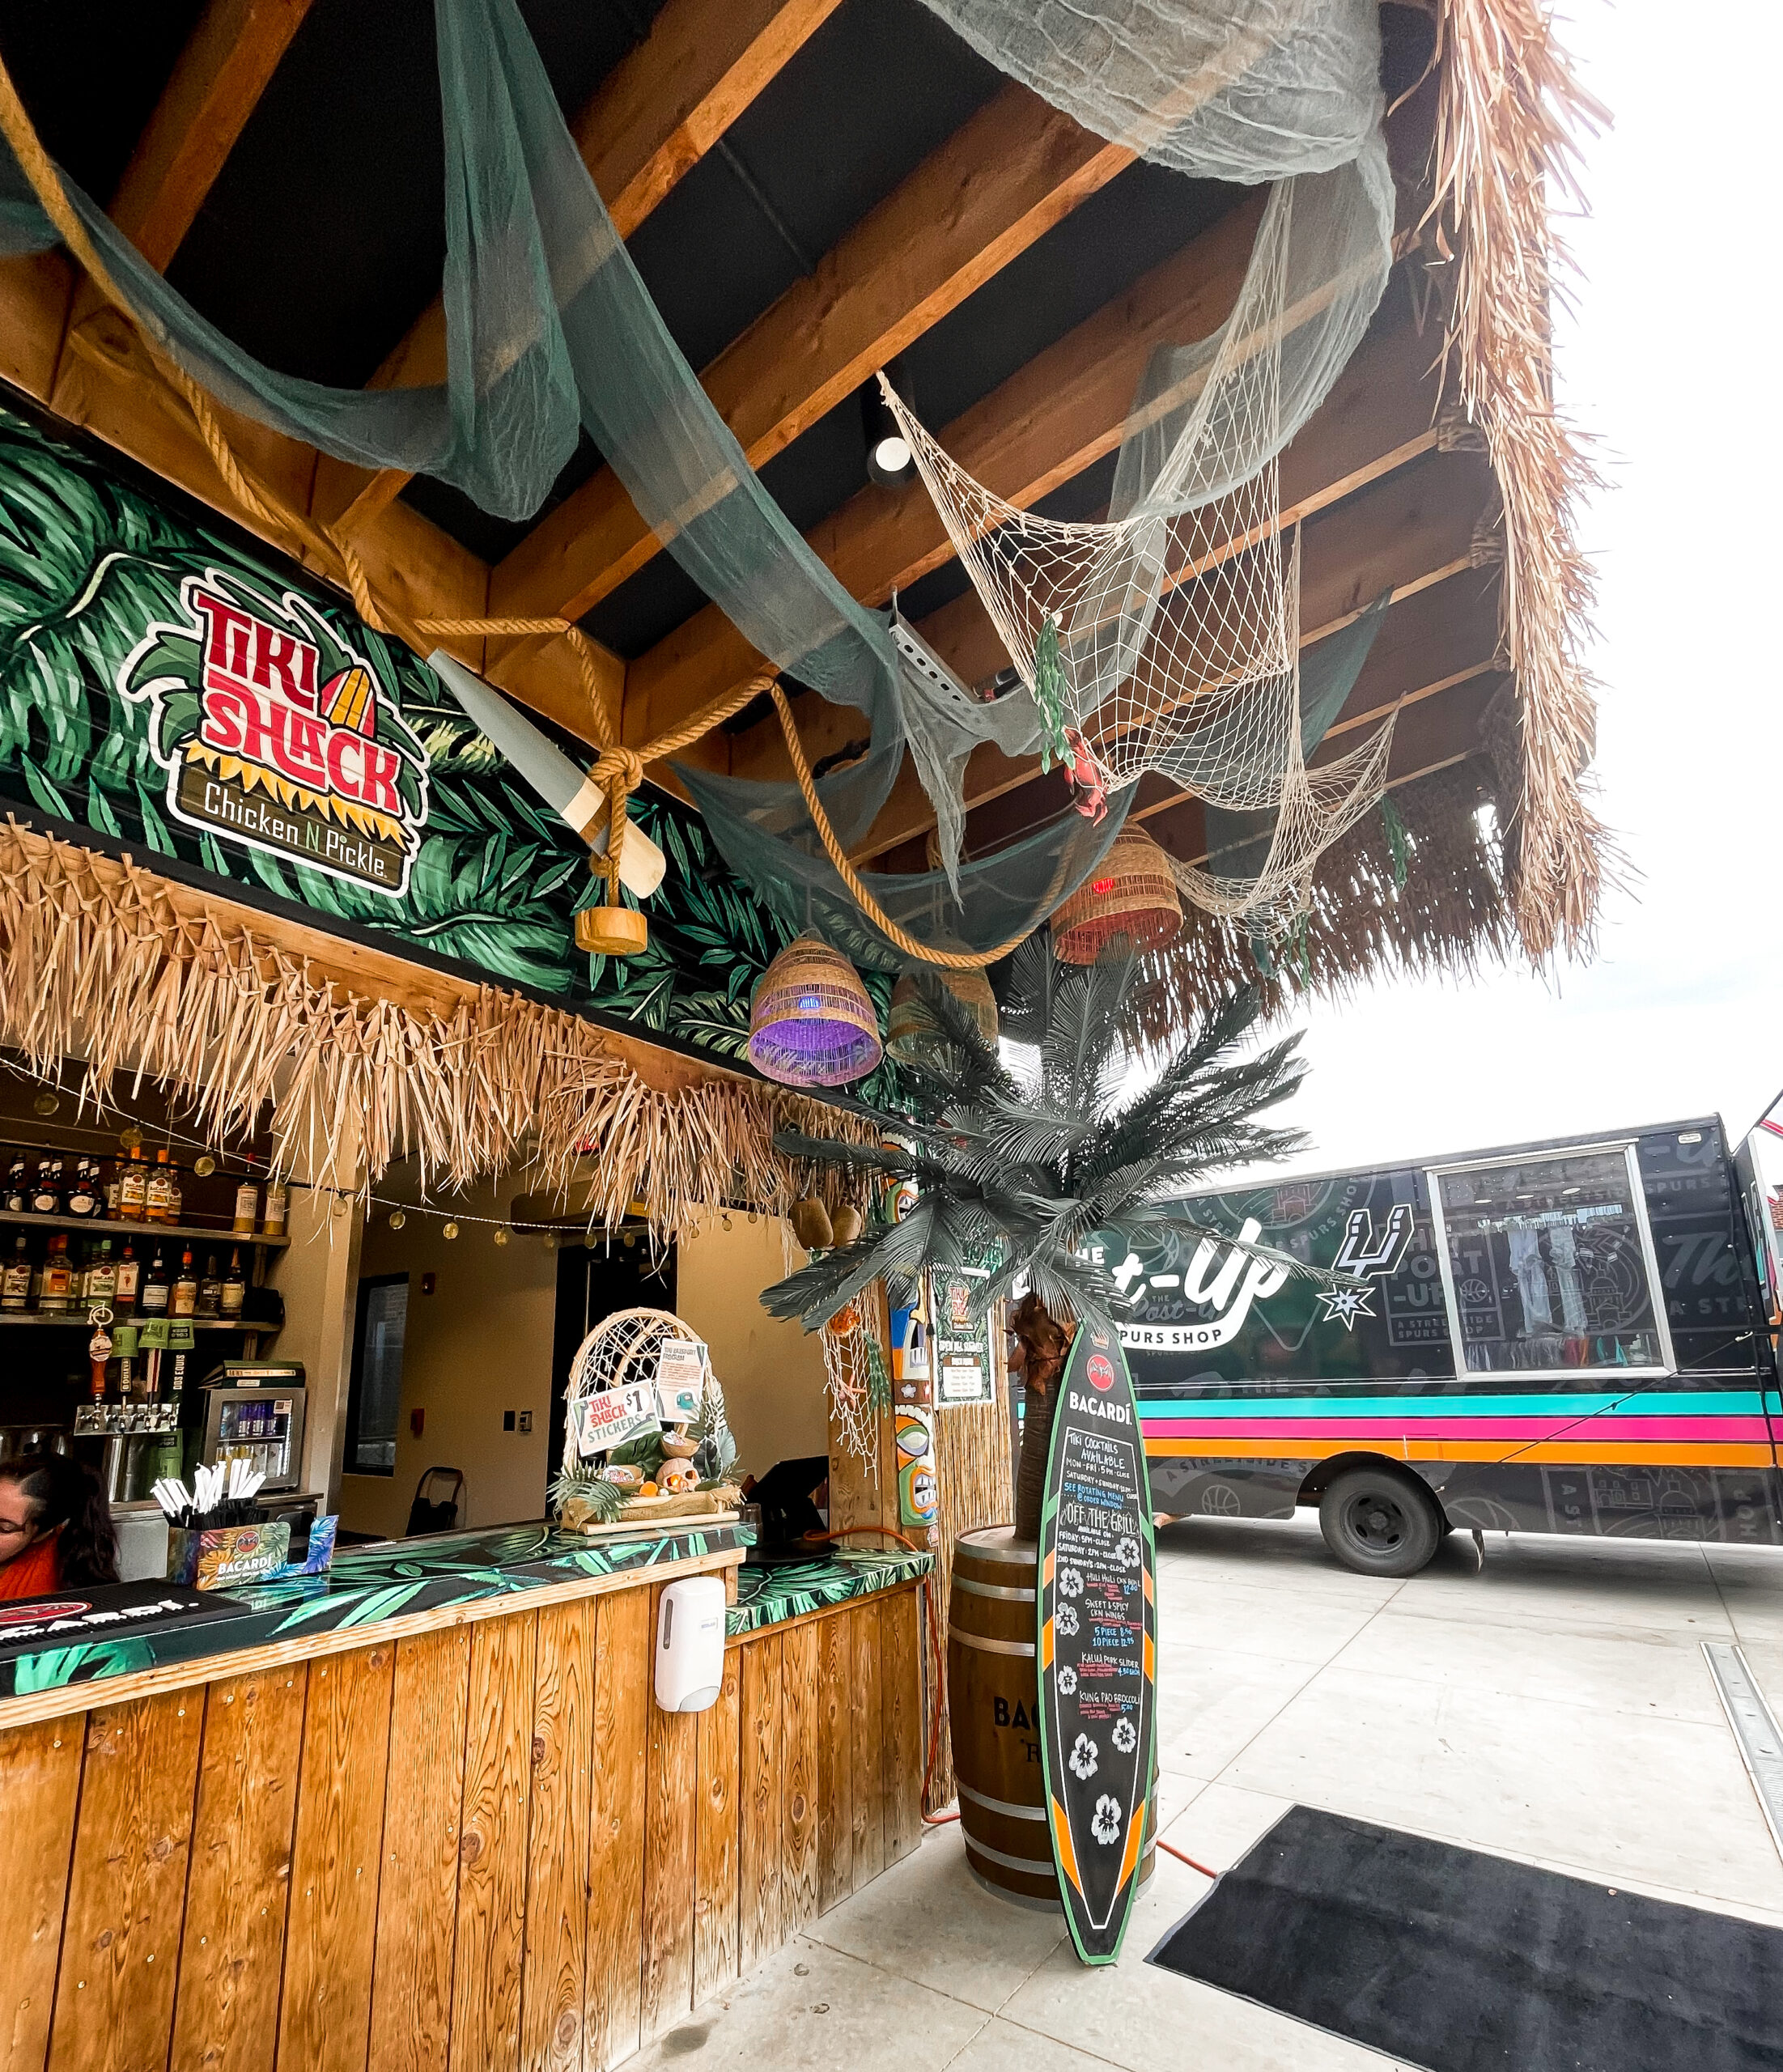 Food truck and tiki shack at Chicken and Pickle.